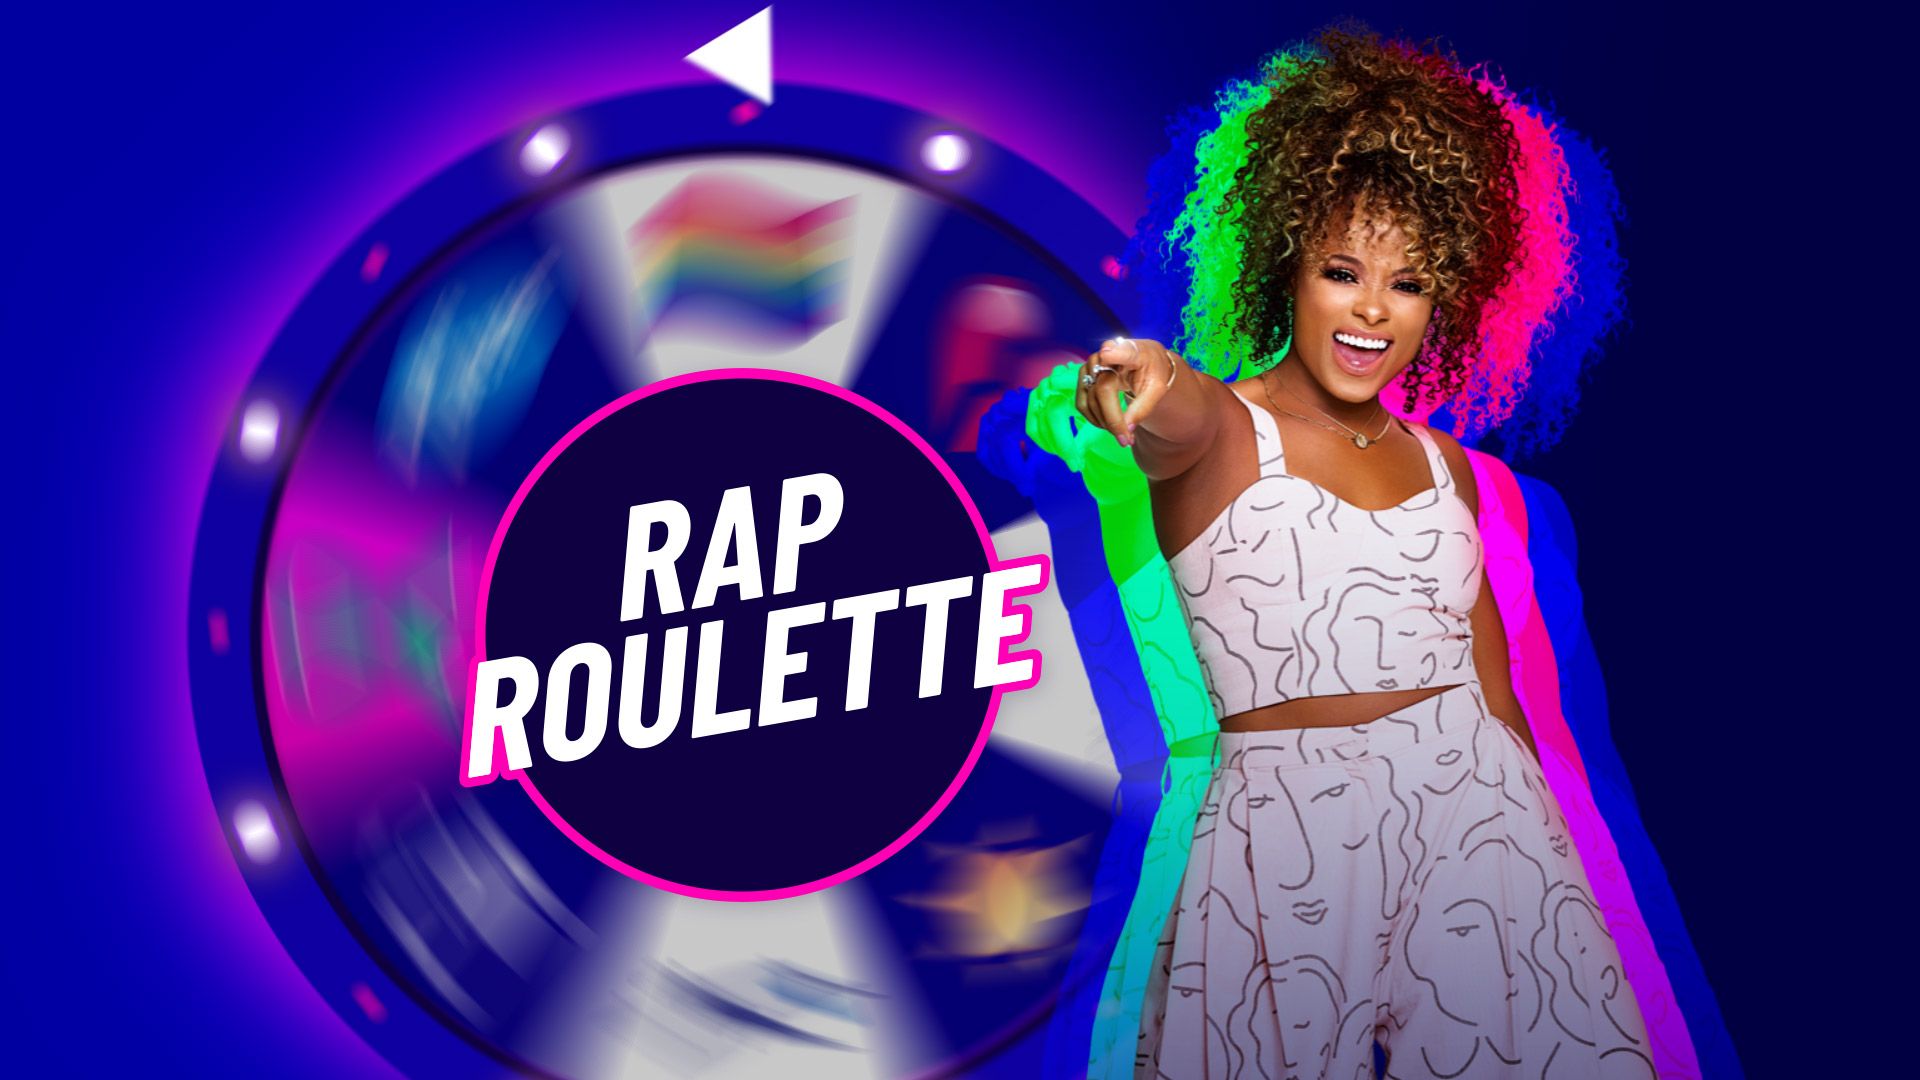 What is Fleur East's Rap Roulette about this week?